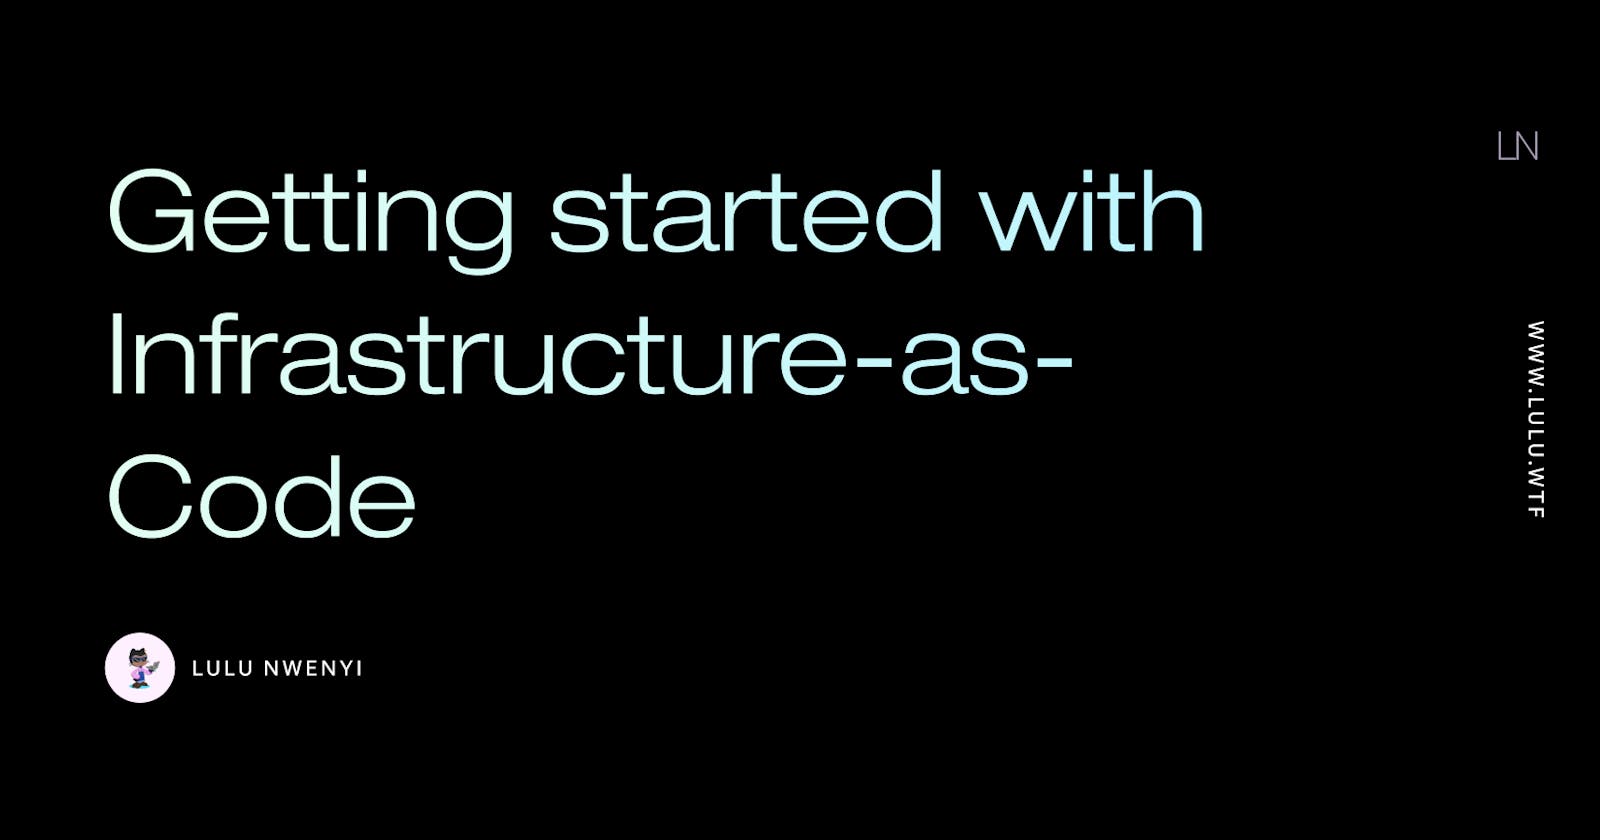 Getting started with Infrastructure-as-Code